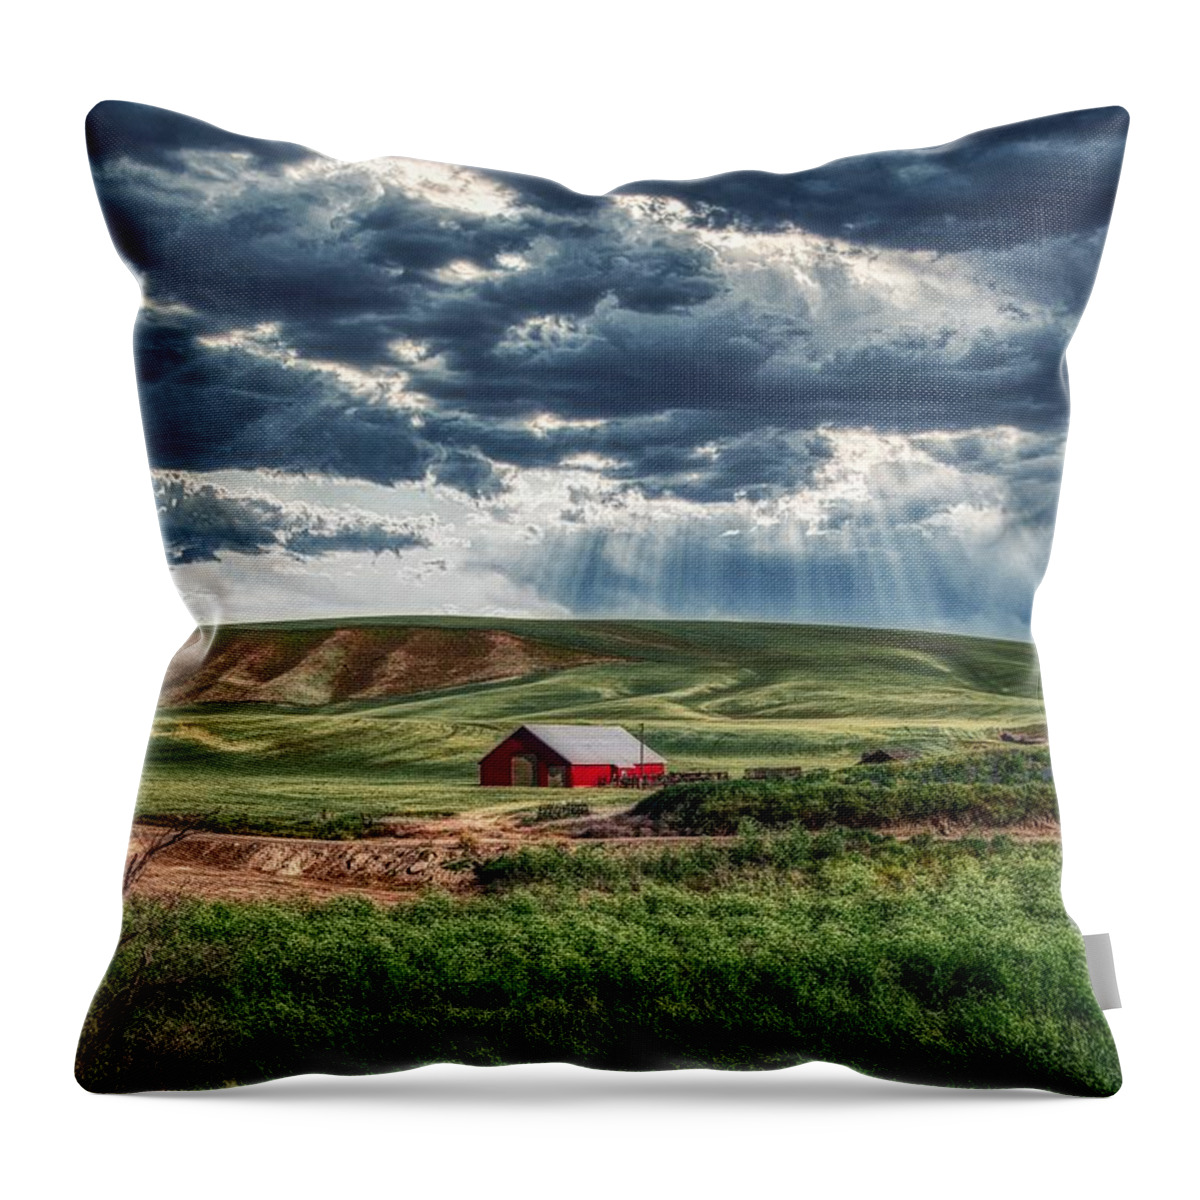 Red Barn Throw Pillow featuring the photograph The Distant Red Barn by Mountain Dreams